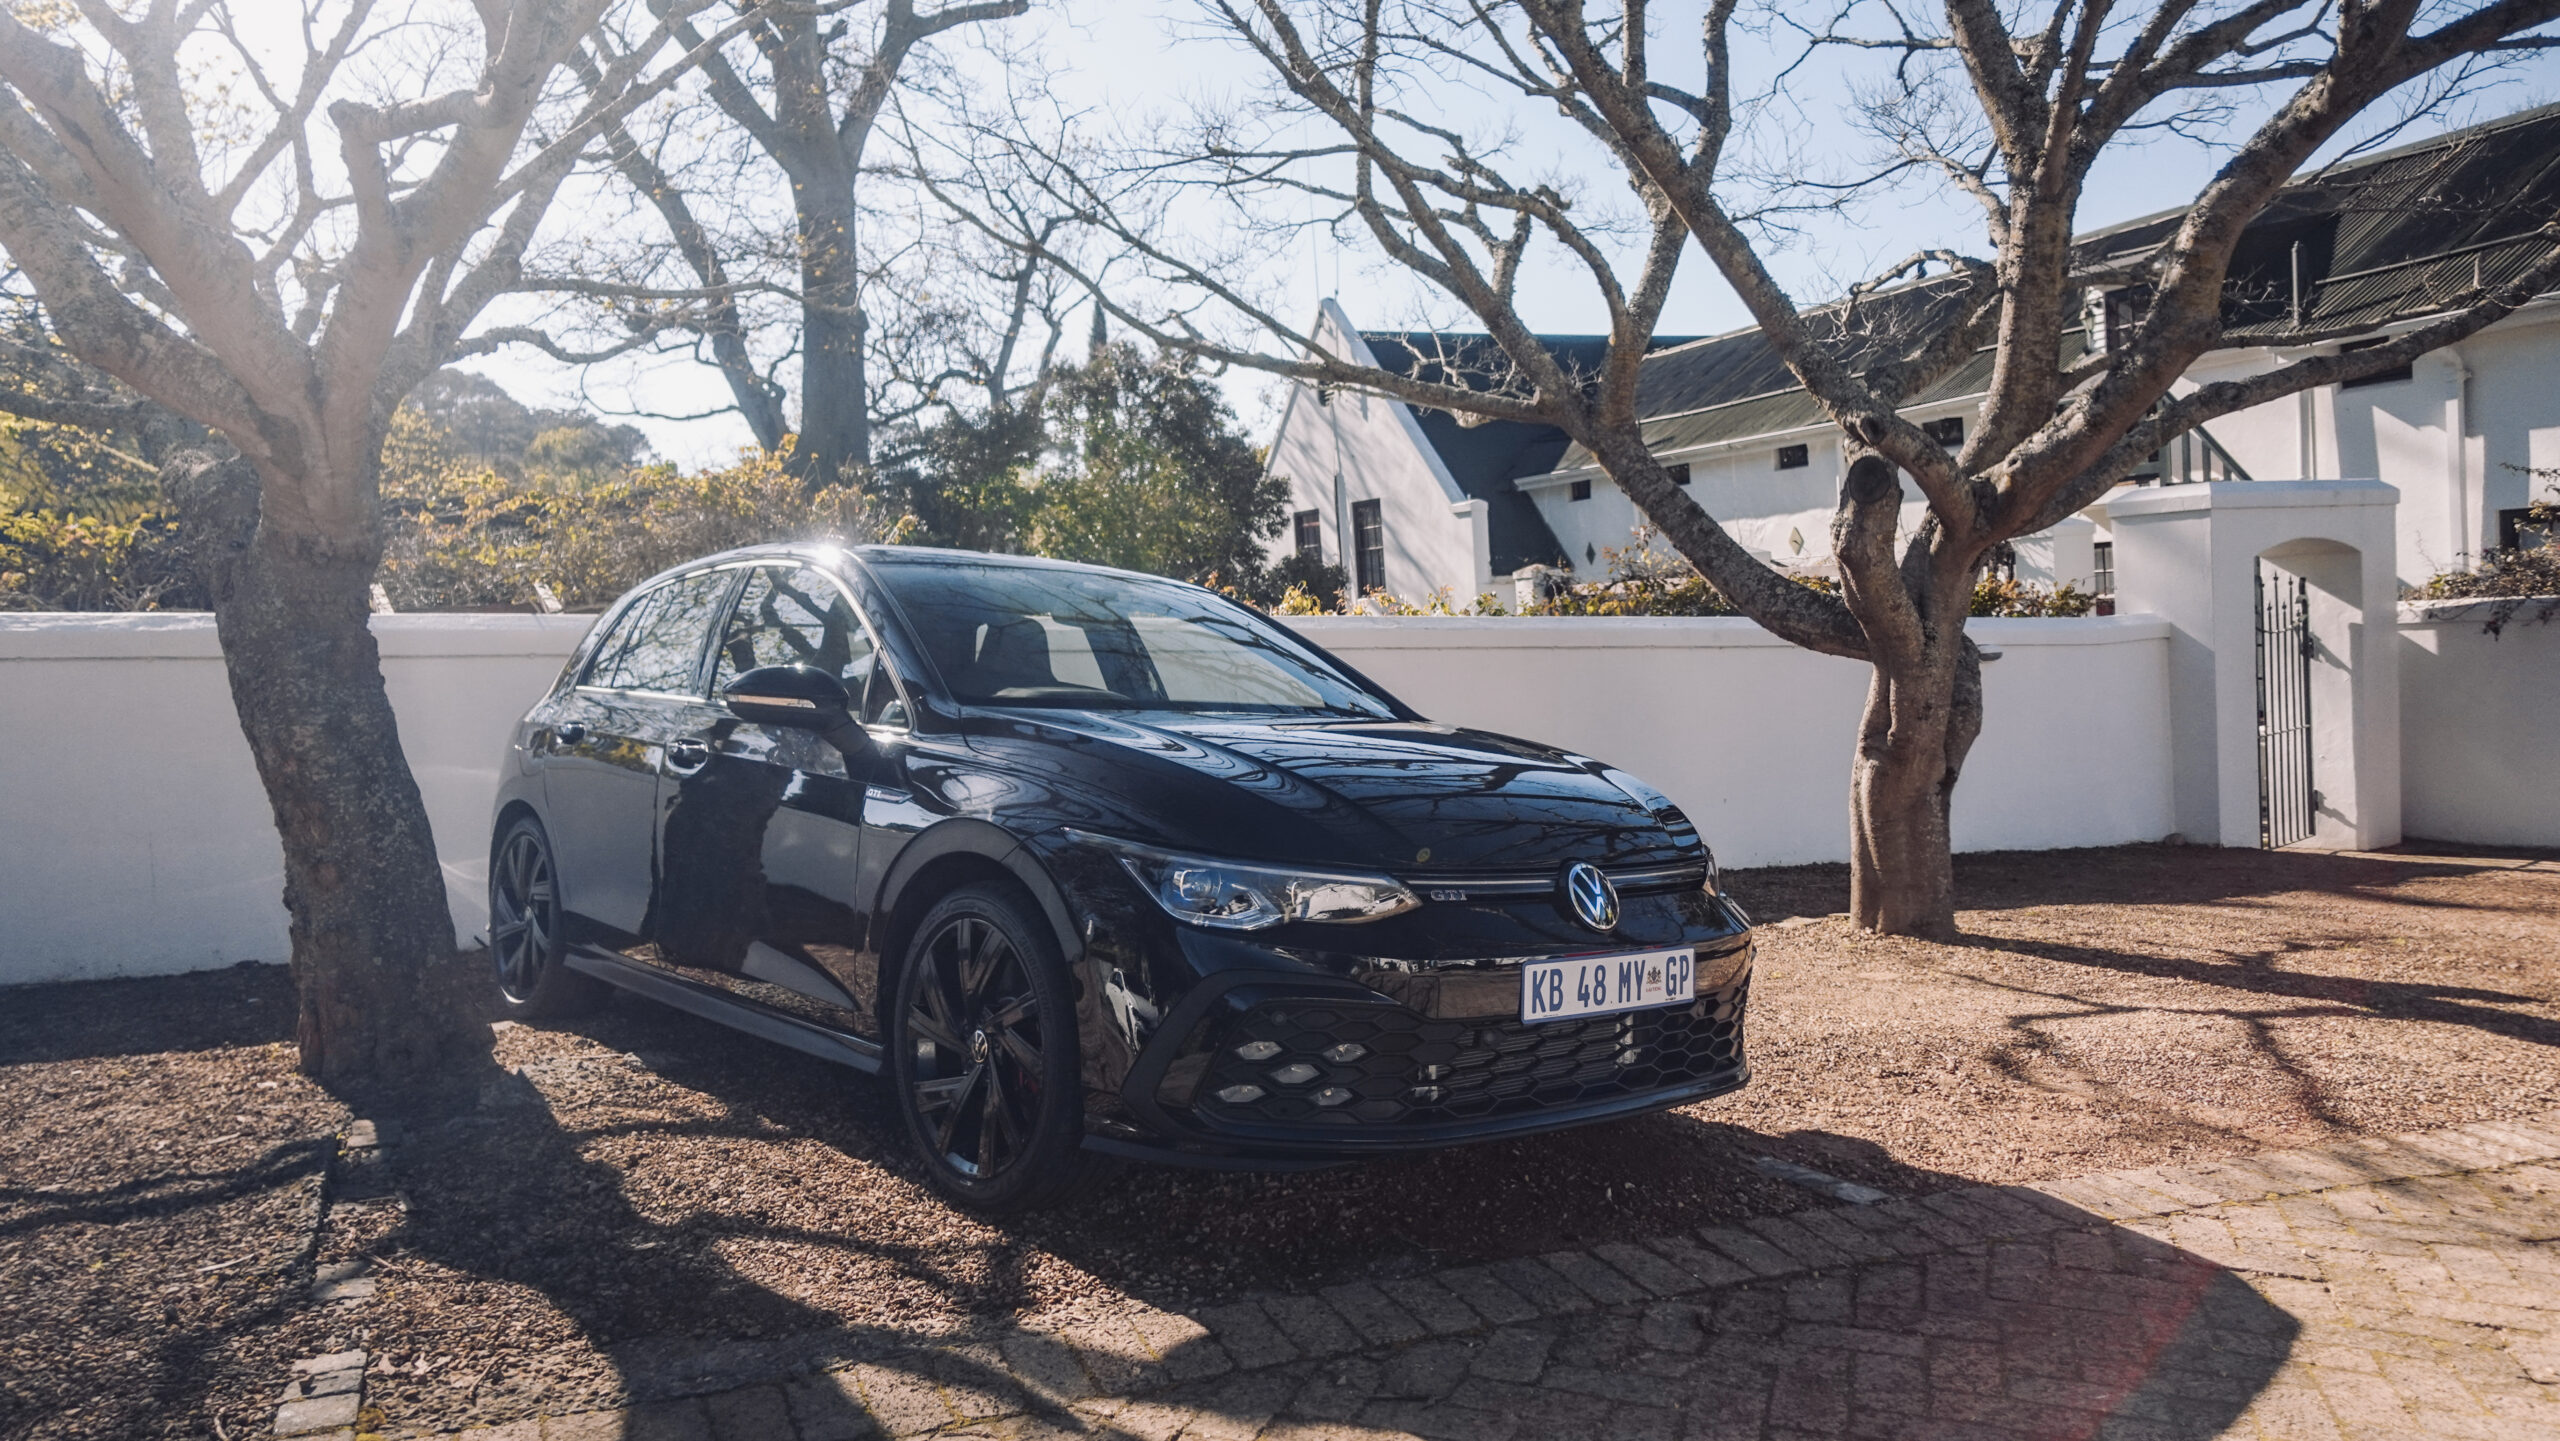 Review: 2020 VW Golf Is The People's Hatchback From A New Era